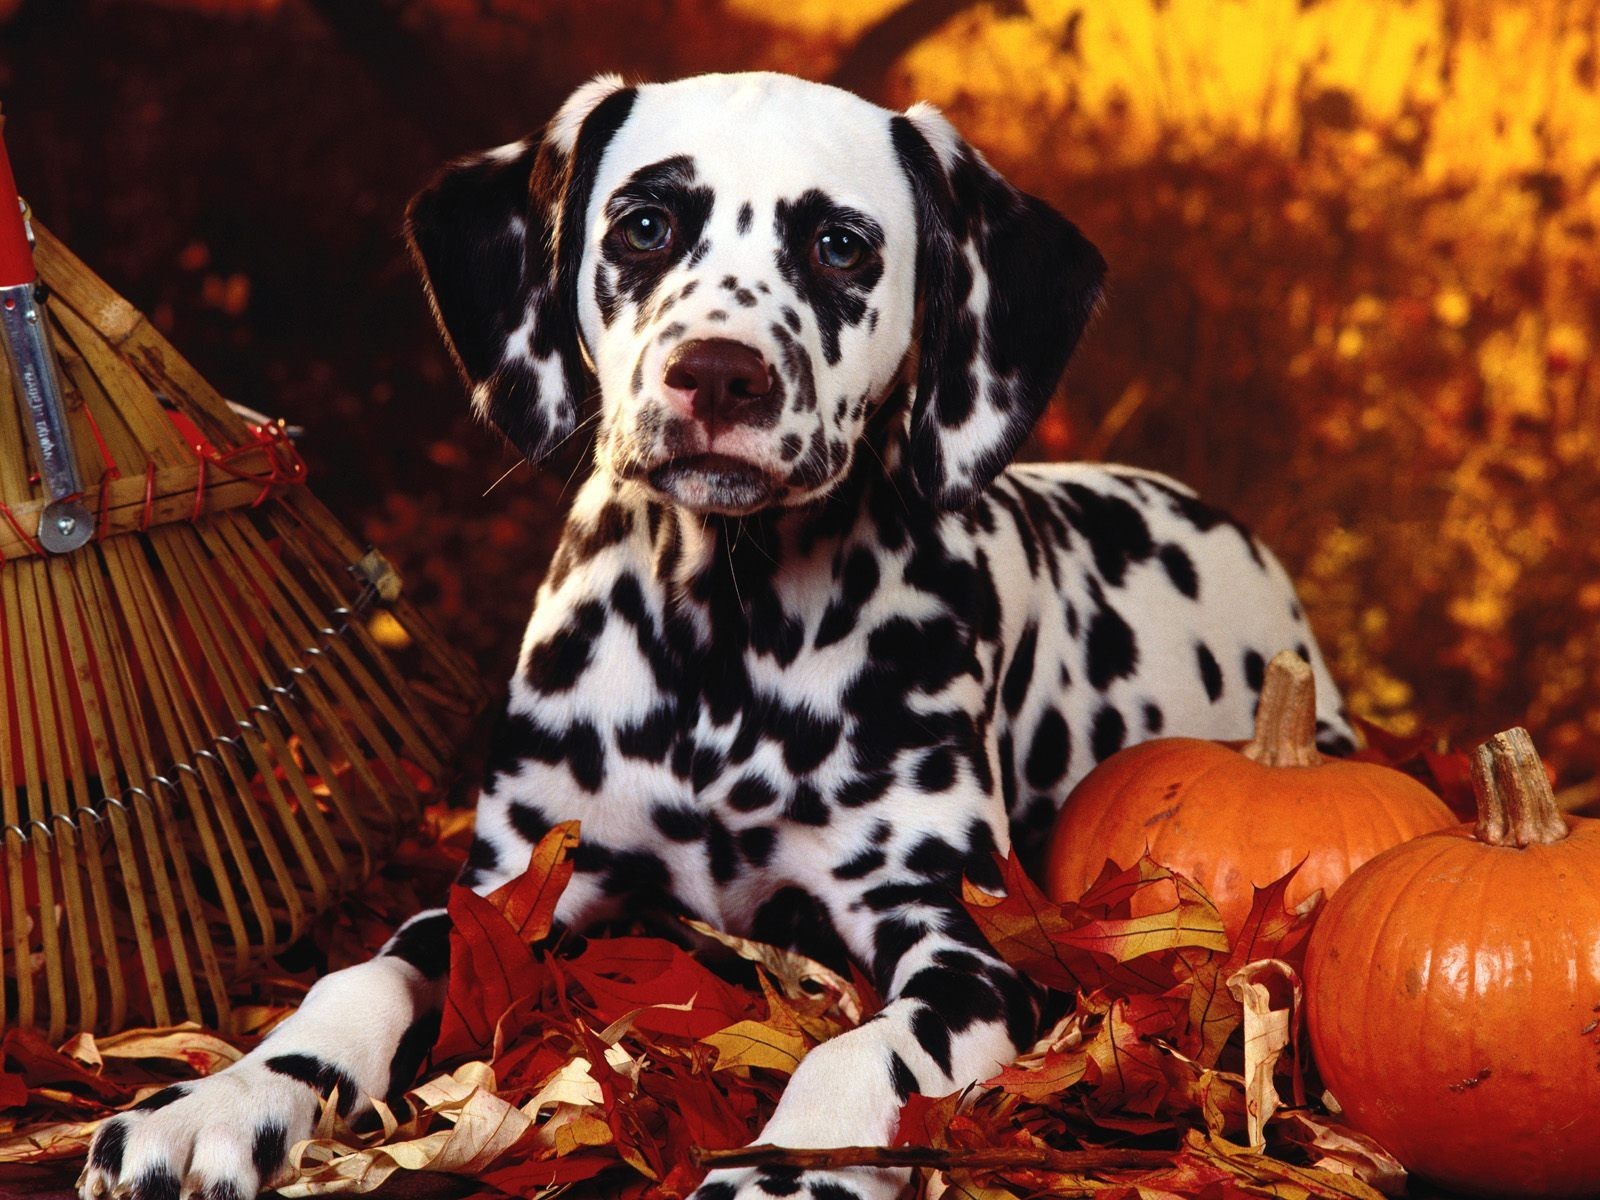 Dalmatian in the halloween theme wallpapers and images ...